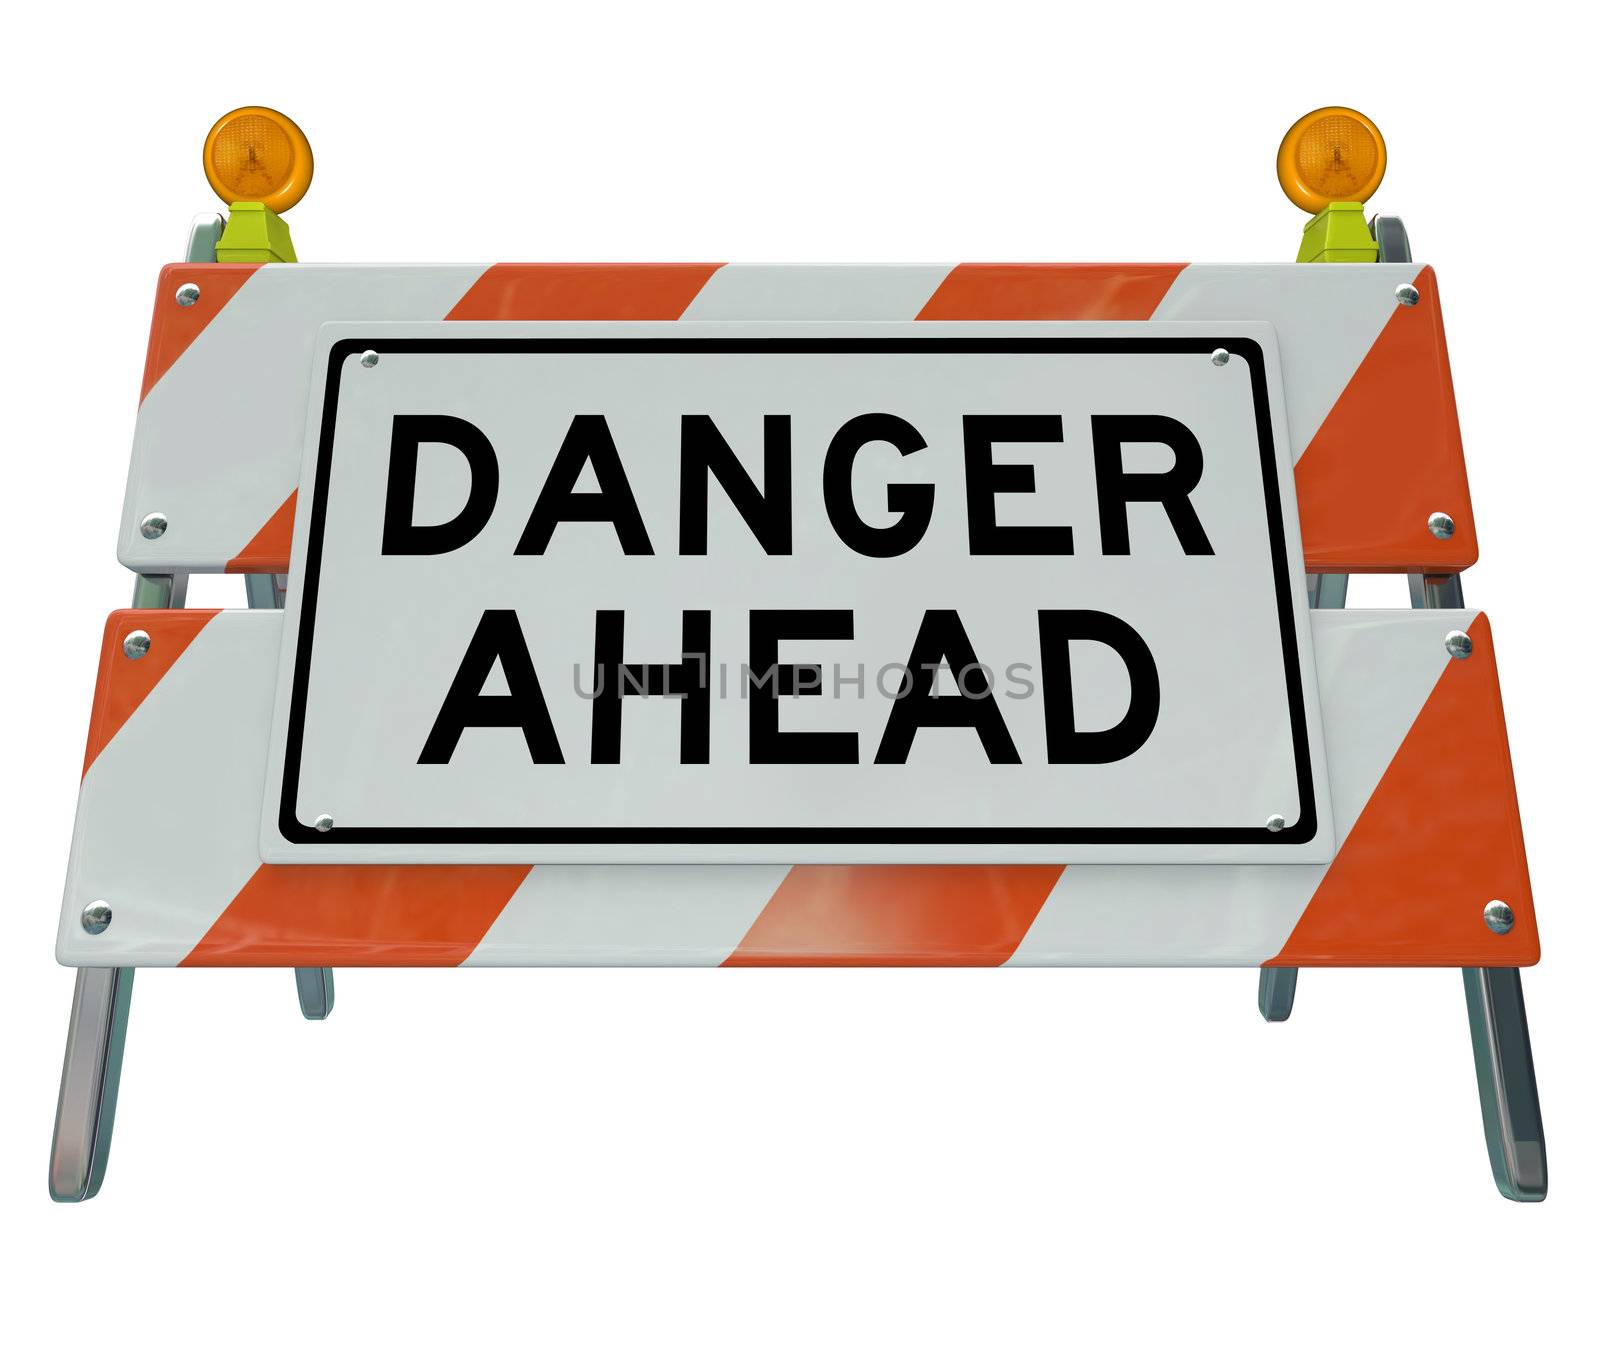 A road barrier reading Danger Ahead to signal that construction is on the road or public area and your way is blocked to caution and warn you from the work underway